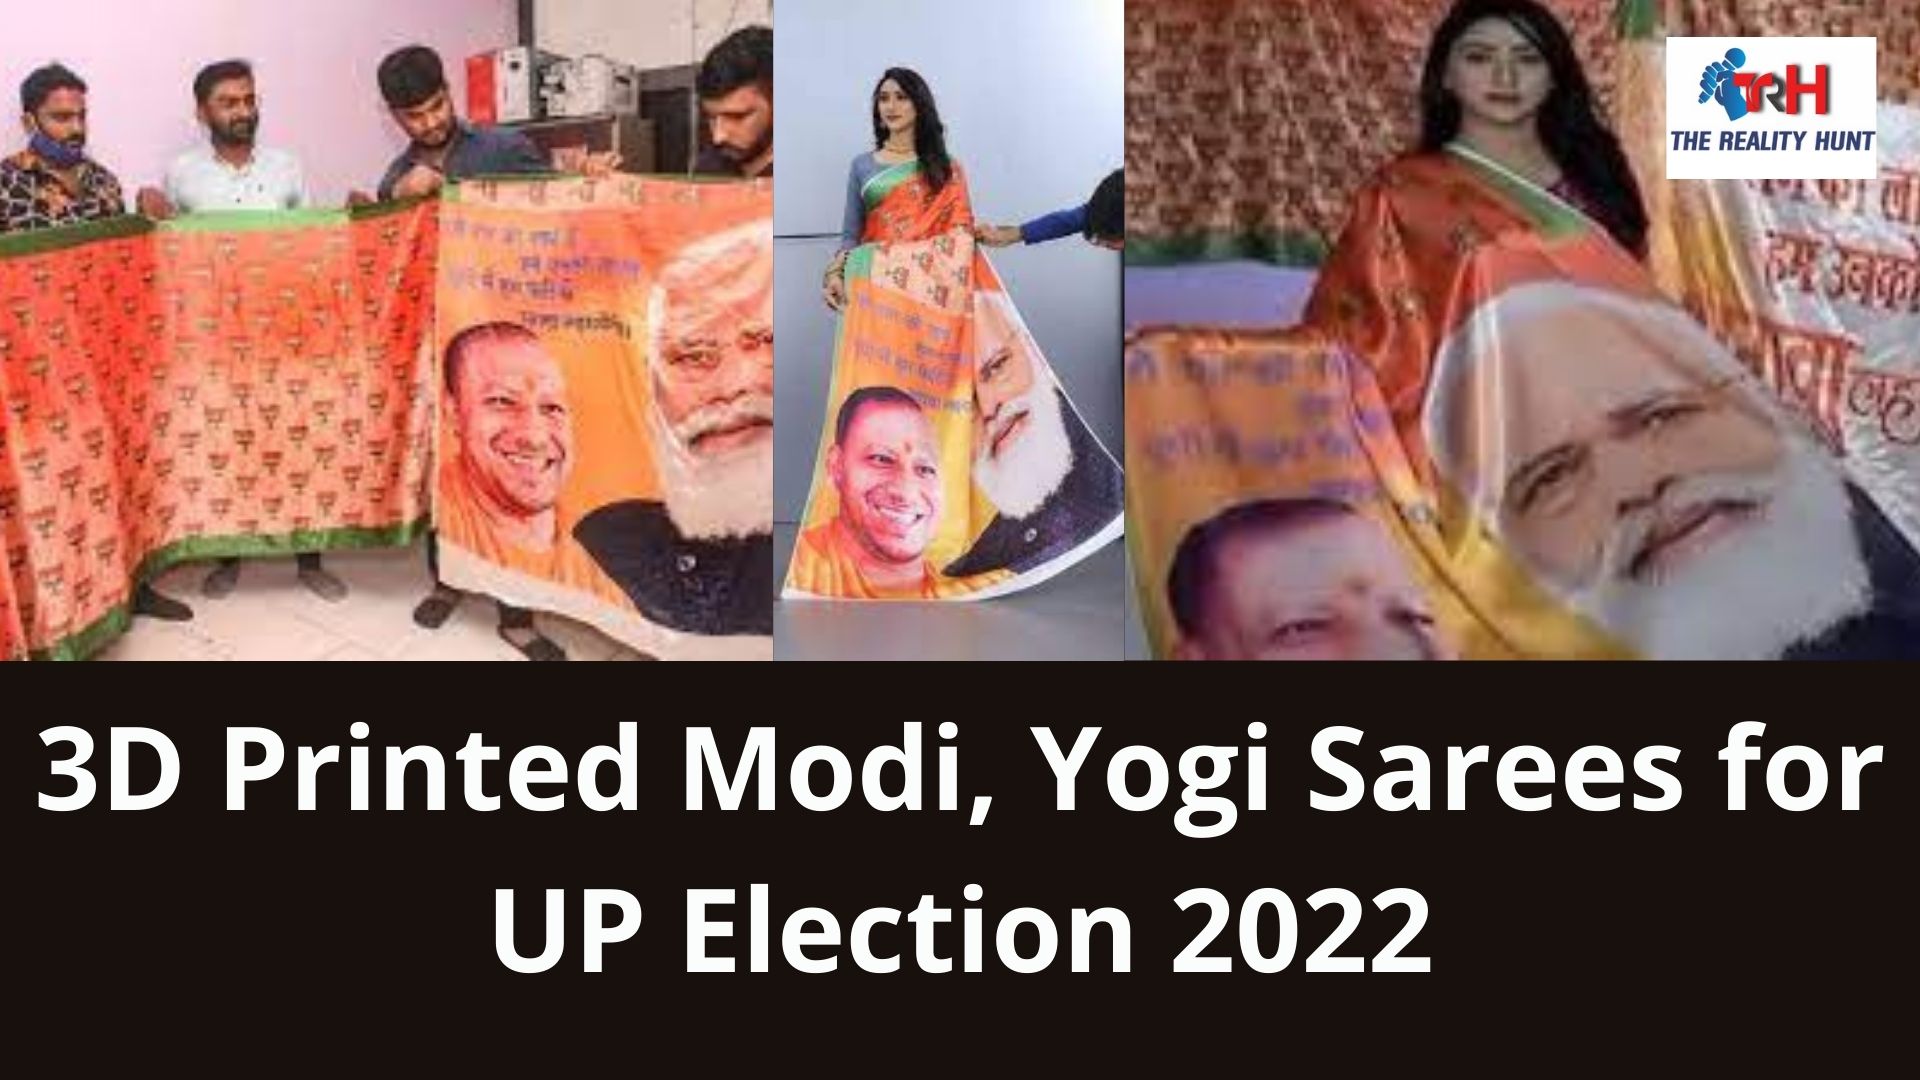 UP Election 2022: Surat Textile Traders Join Poll Campaign with 3D Printed Modi, Yogi Sarees